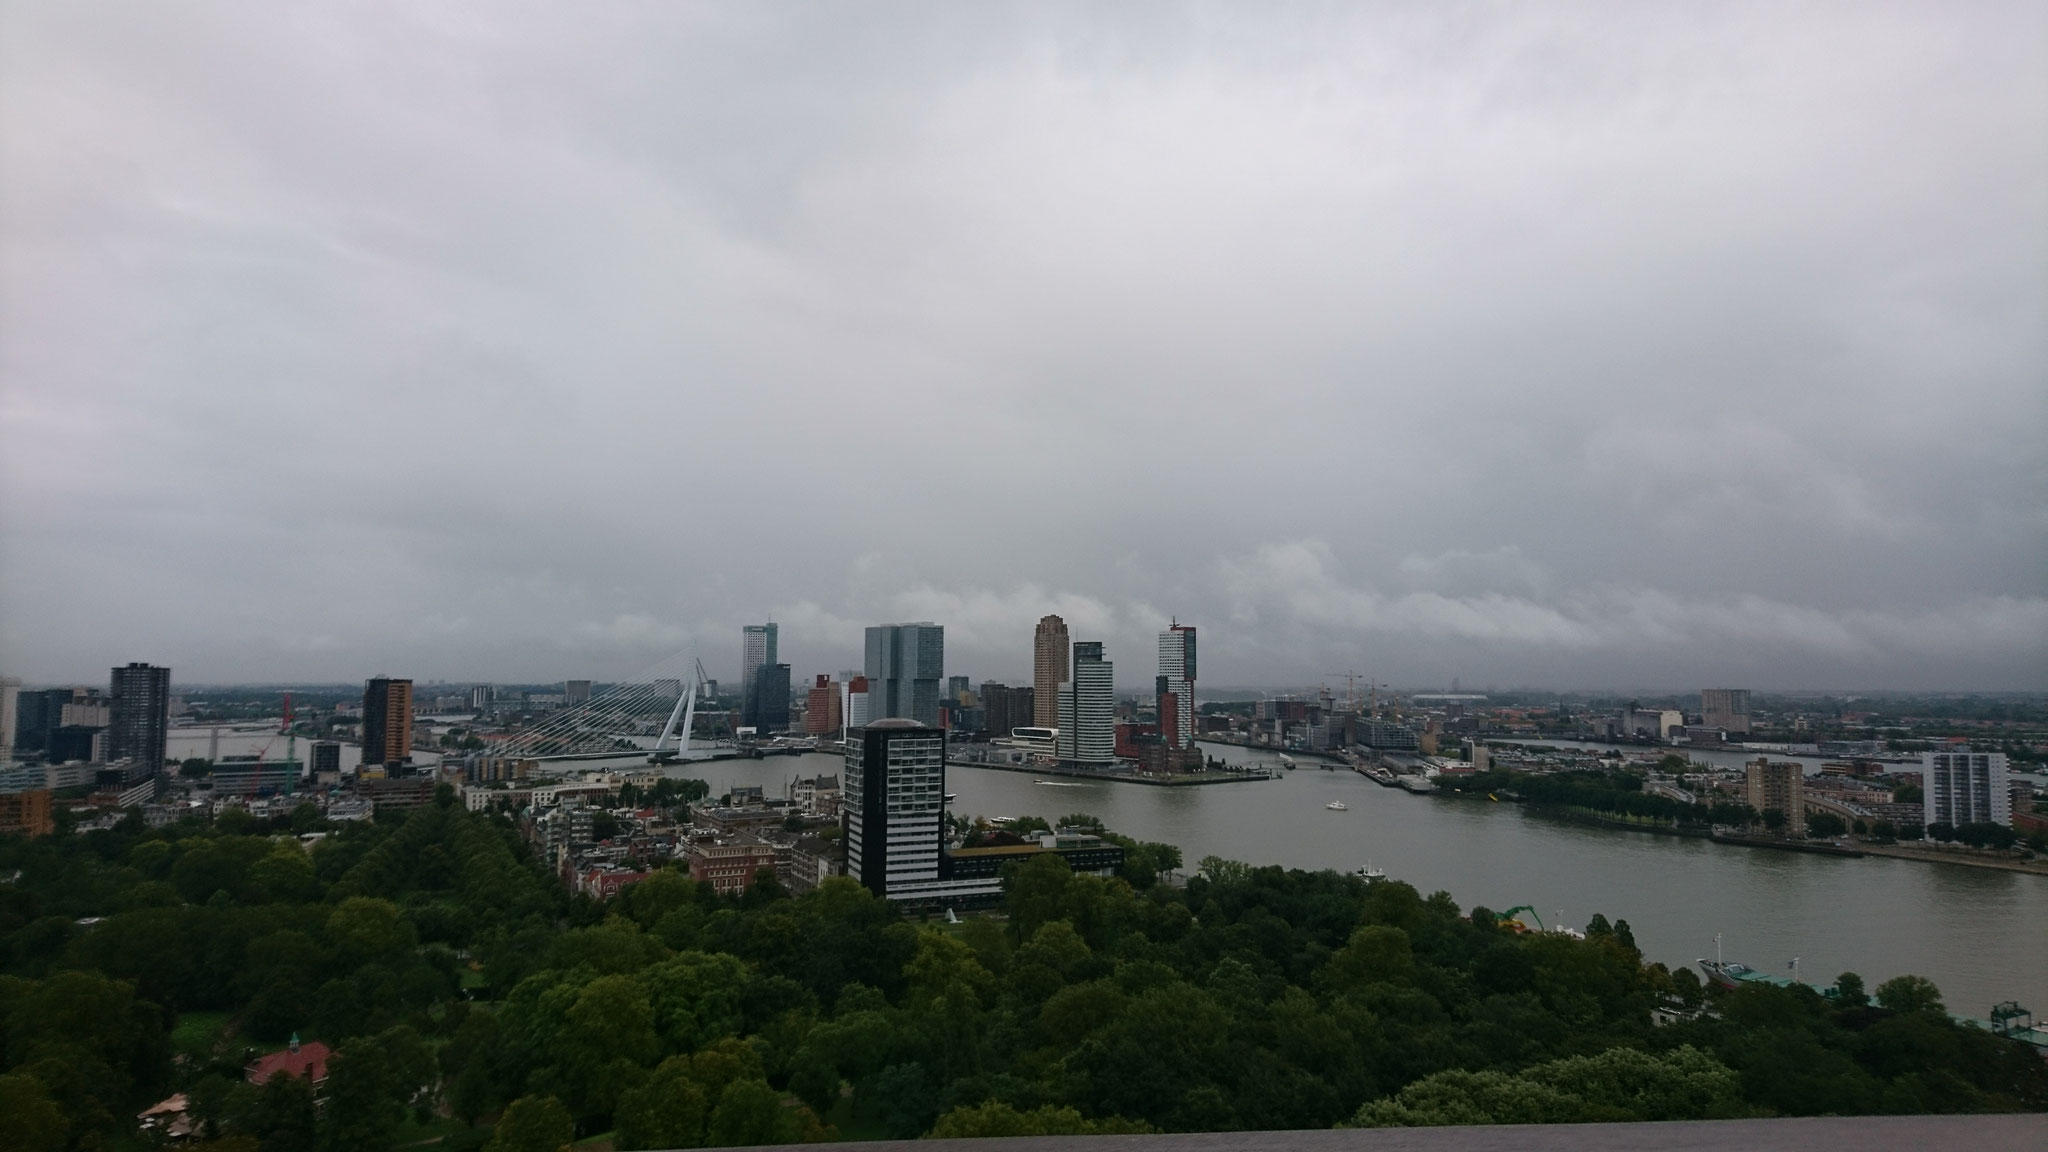 View from the Euromast